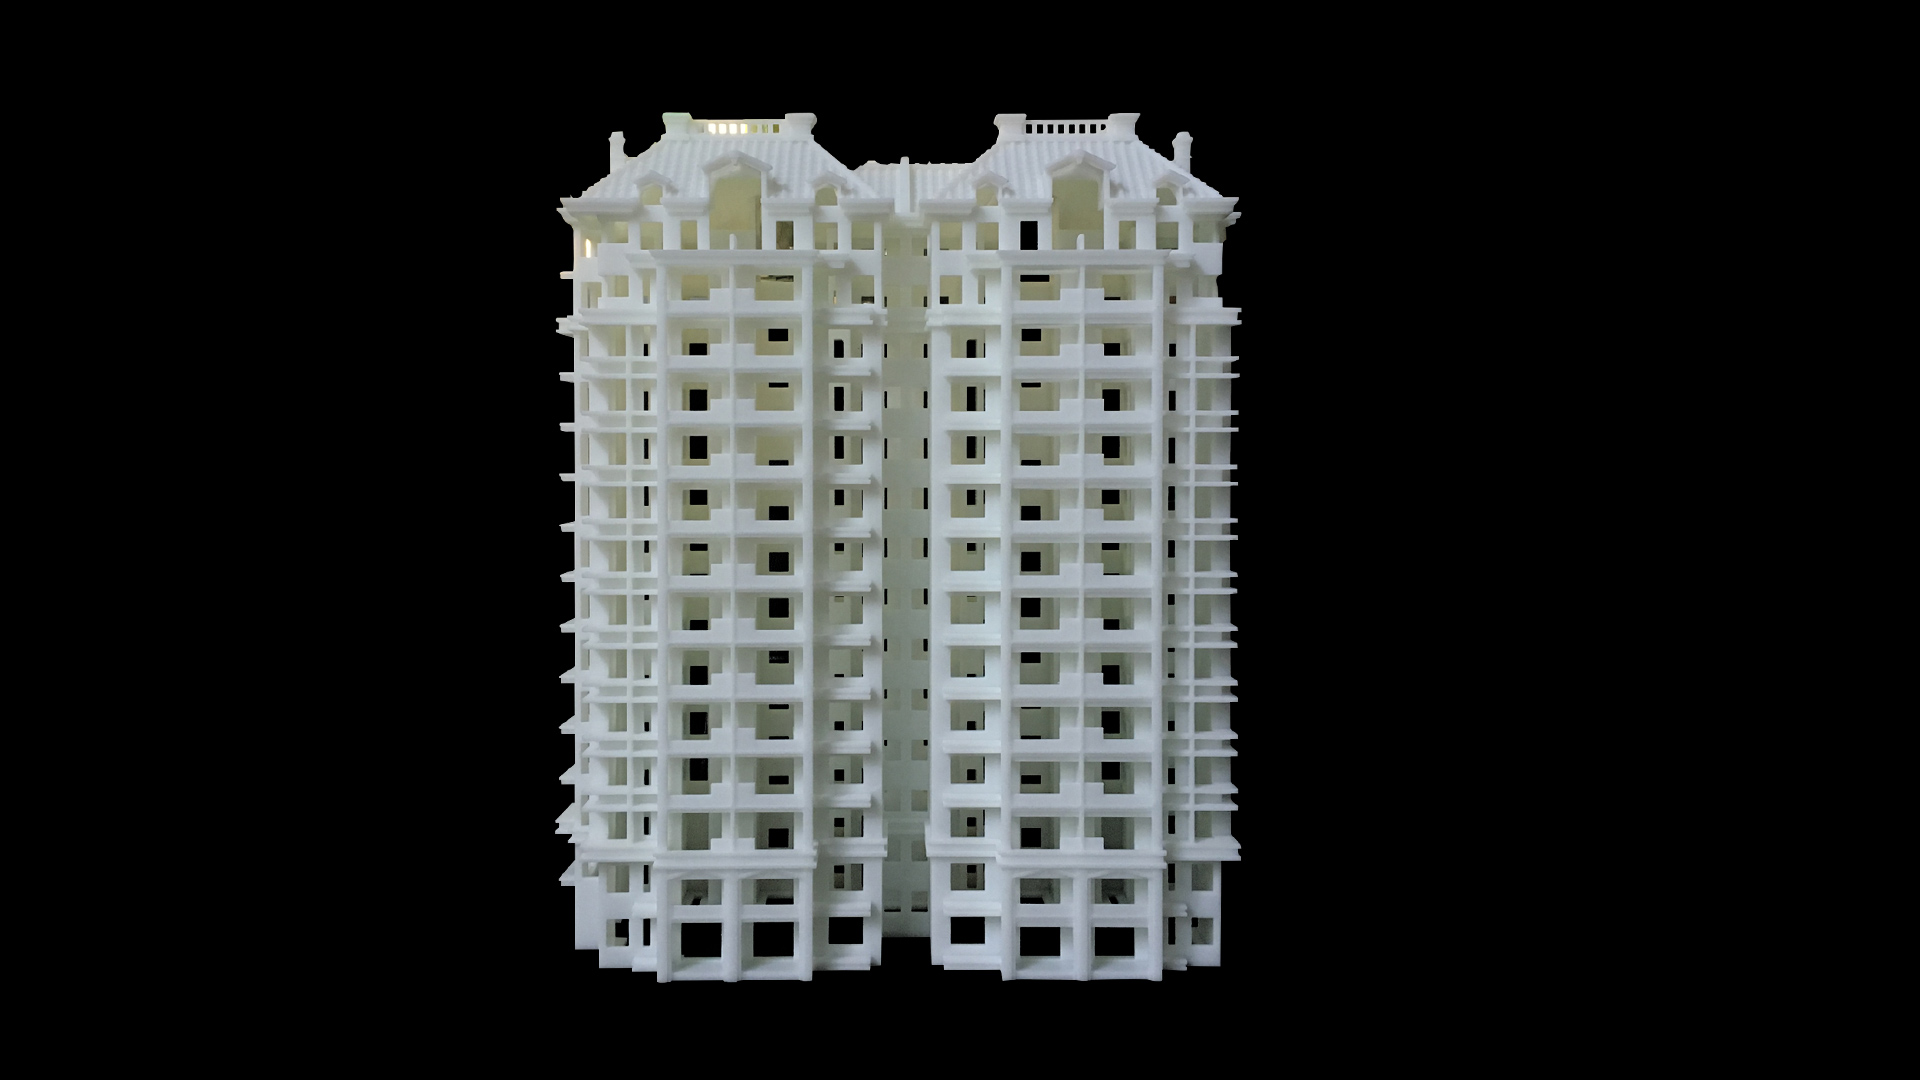 How much is a 3D printed architectural model? What are the applications of 3D printing technology in the construction field?